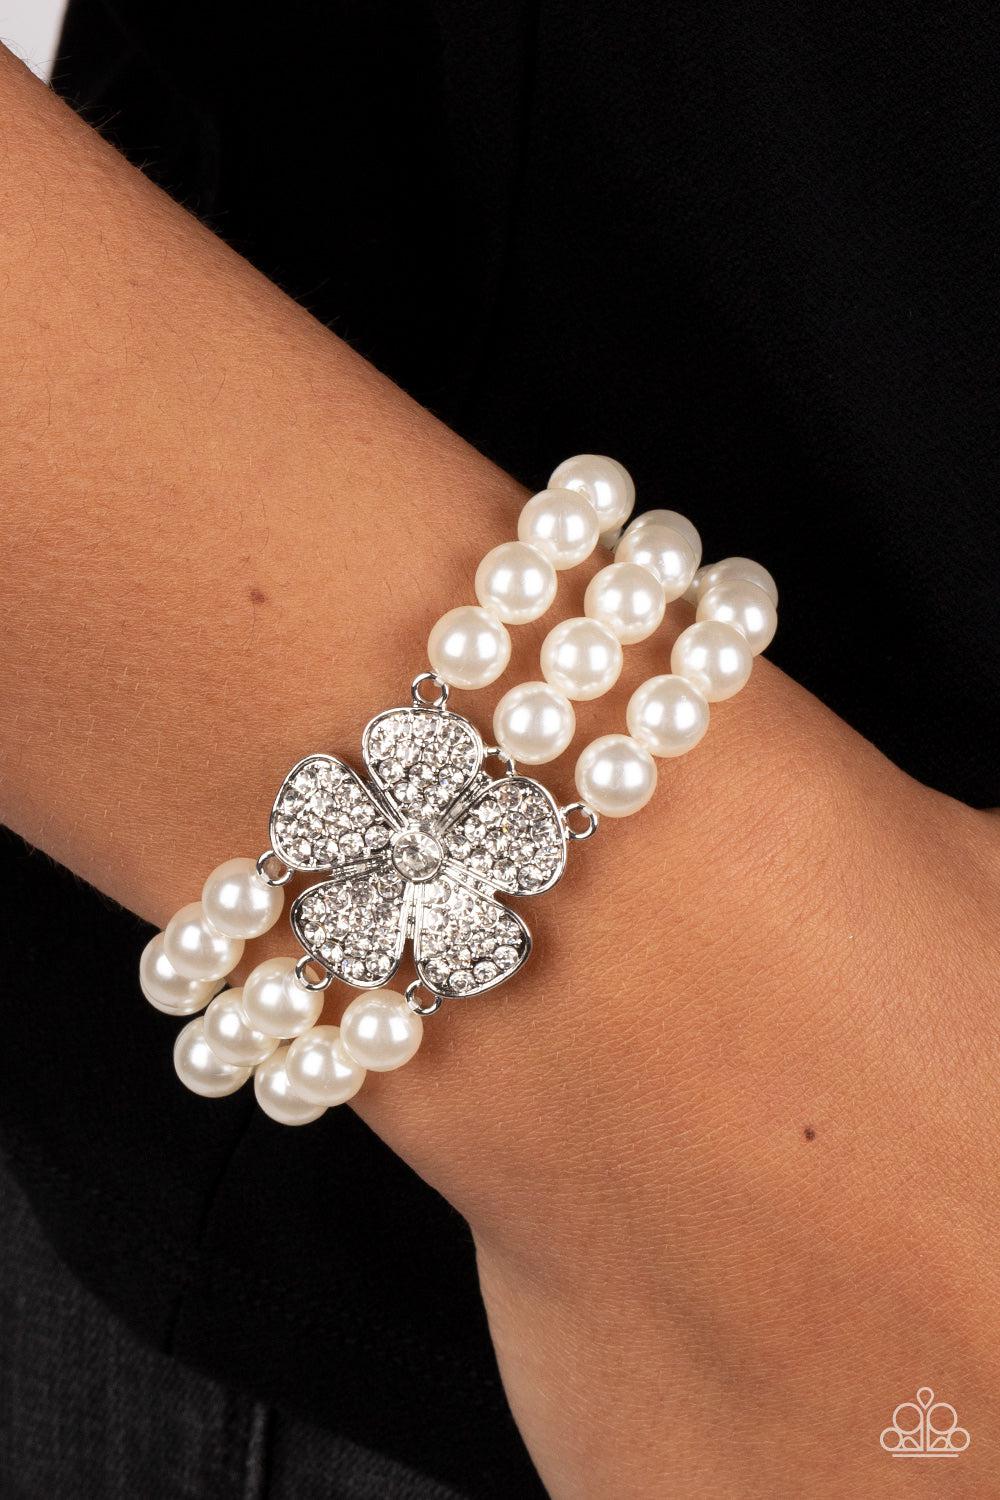 Park Avenue Orchard White Pearl &amp; Rhinestone Bracelet - Paparazzi Accessories-on model - CarasShop.com - $5 Jewelry by Cara Jewels